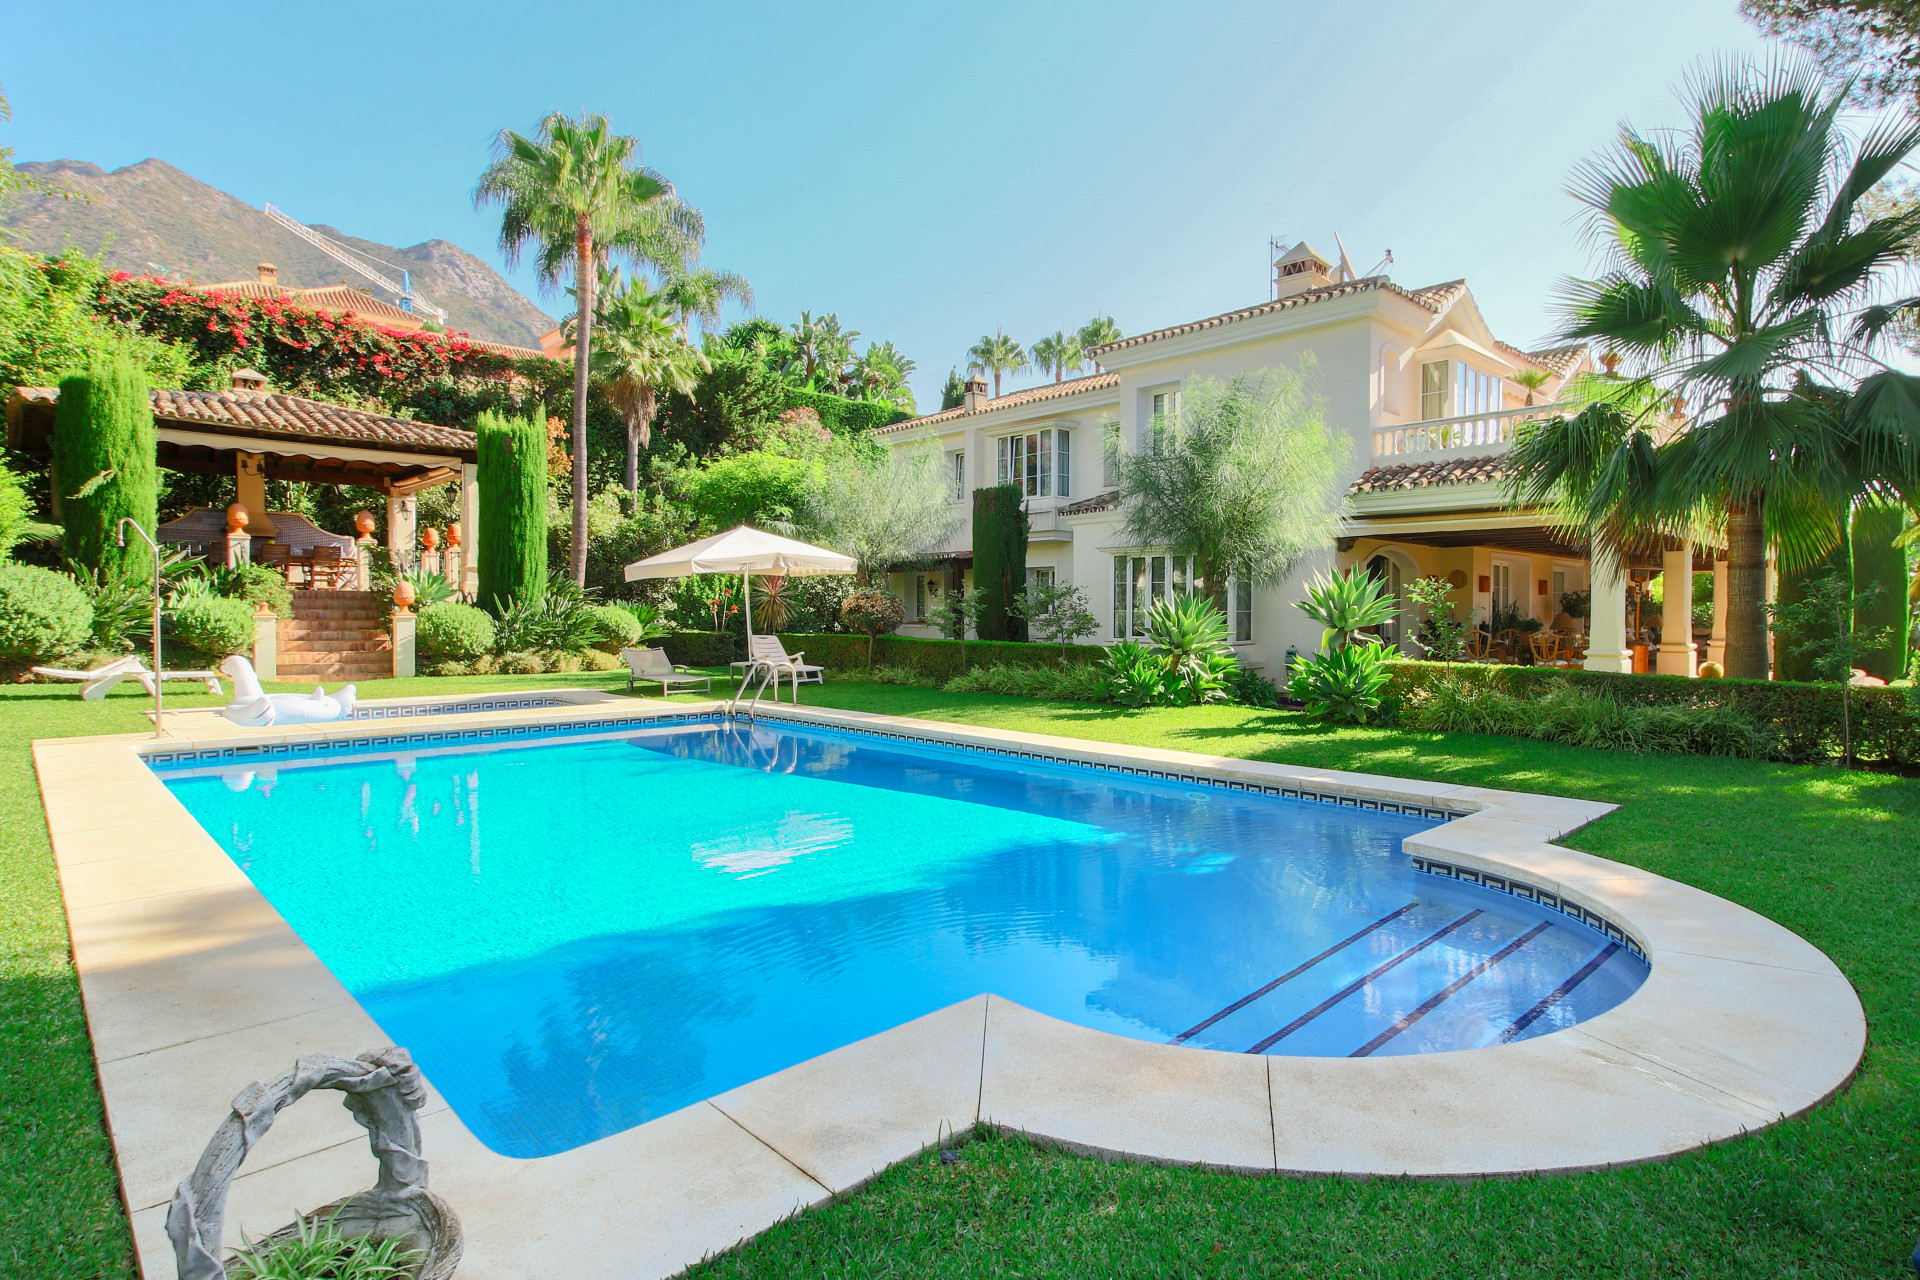 Large classical villa in one of the most sought-after urbanizations in Marbella.